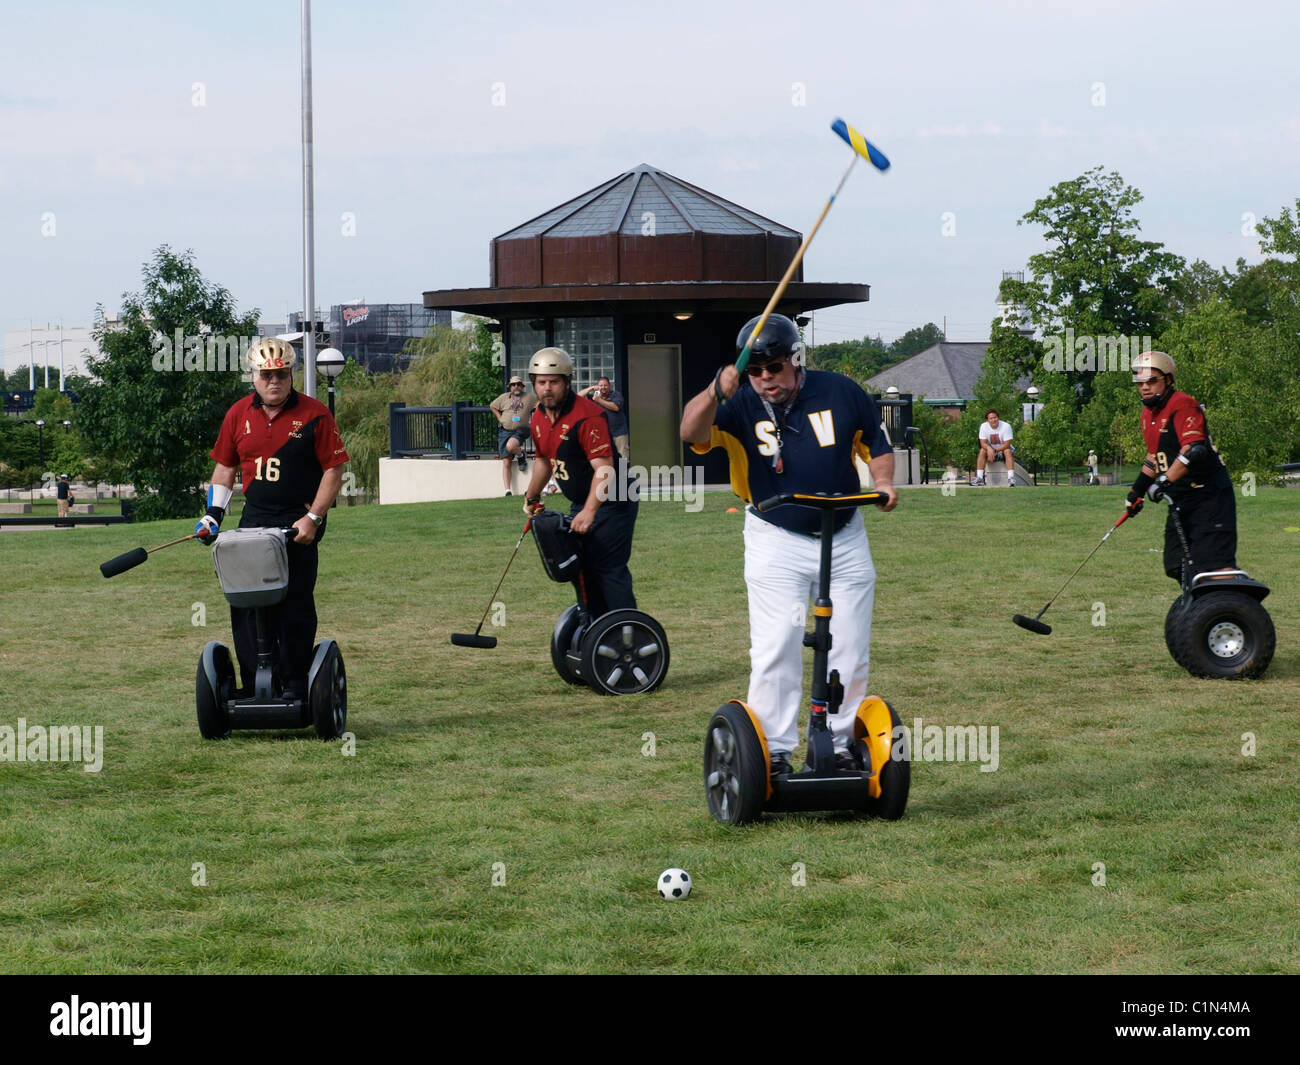 IT'S SEGWAY POLO! Sport lovers get to grips with a modernised version of  polo - on SEGWAYS. The players swapped horseback for Stock Photo - Alamy